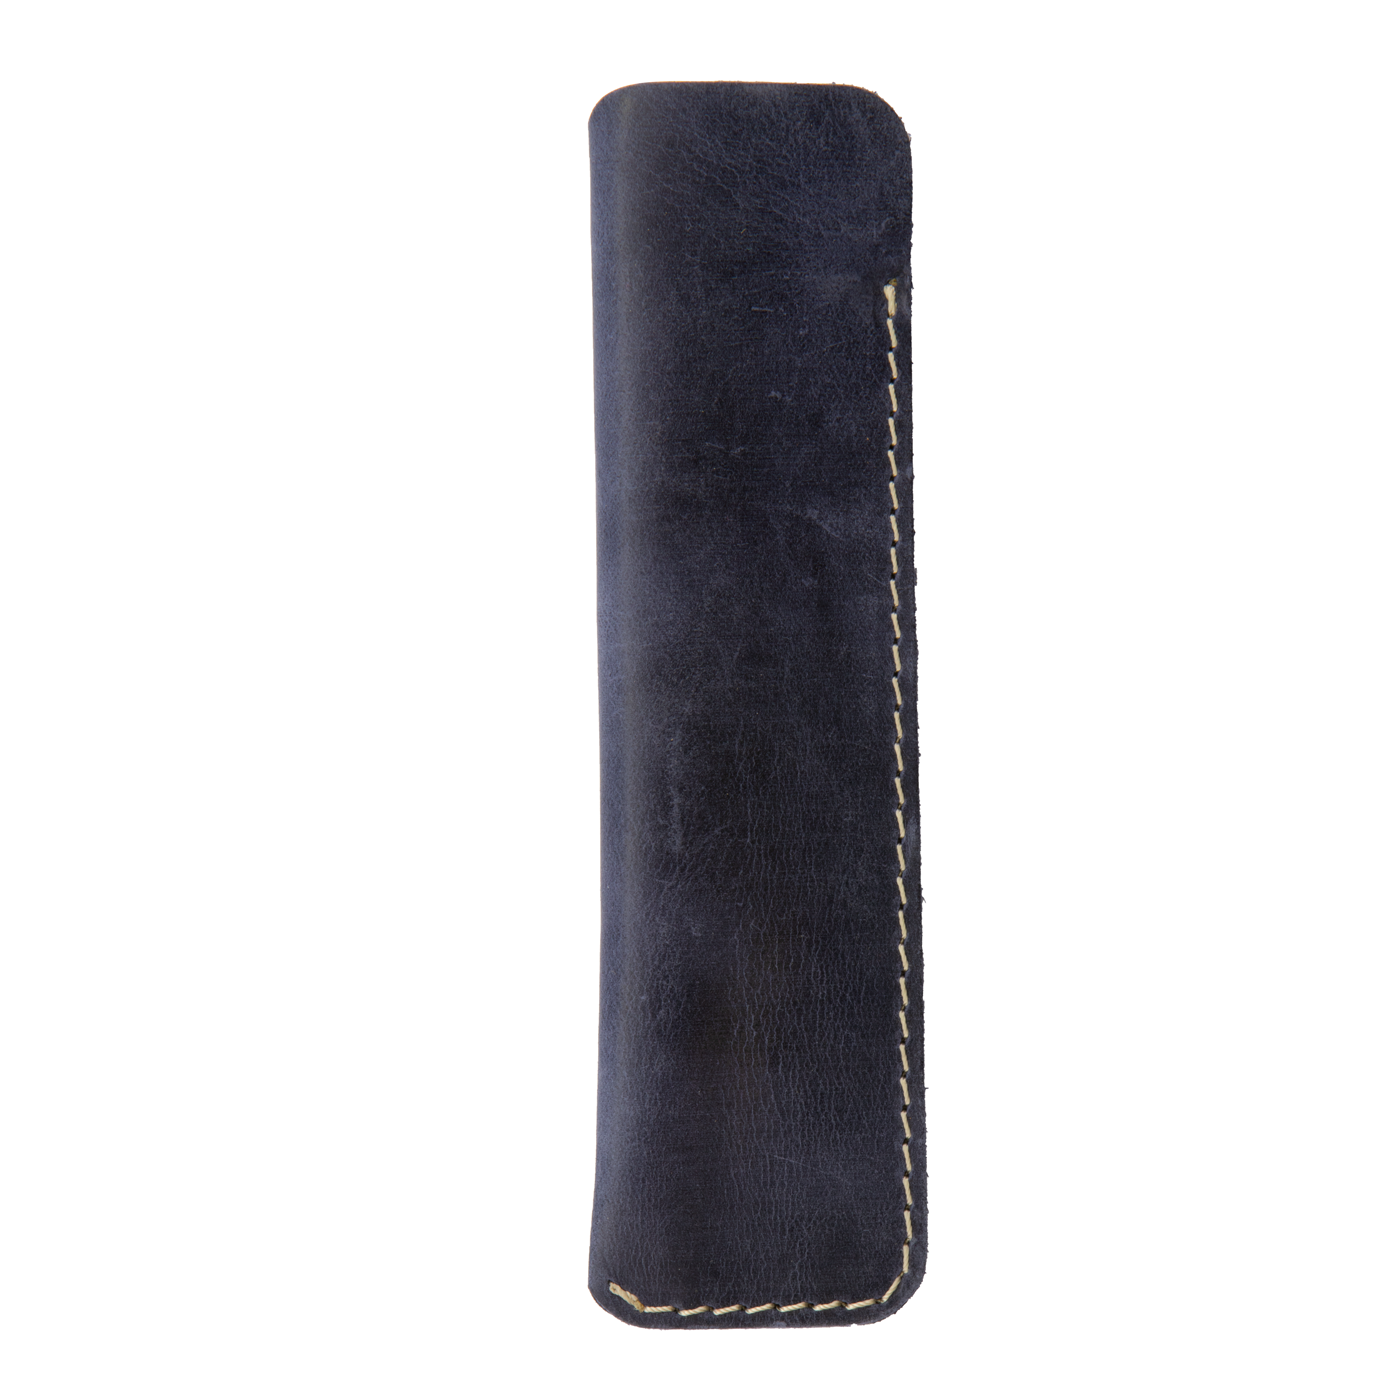 Galen Leather Co. Leather Single Pen Sleeve - Navy Blue